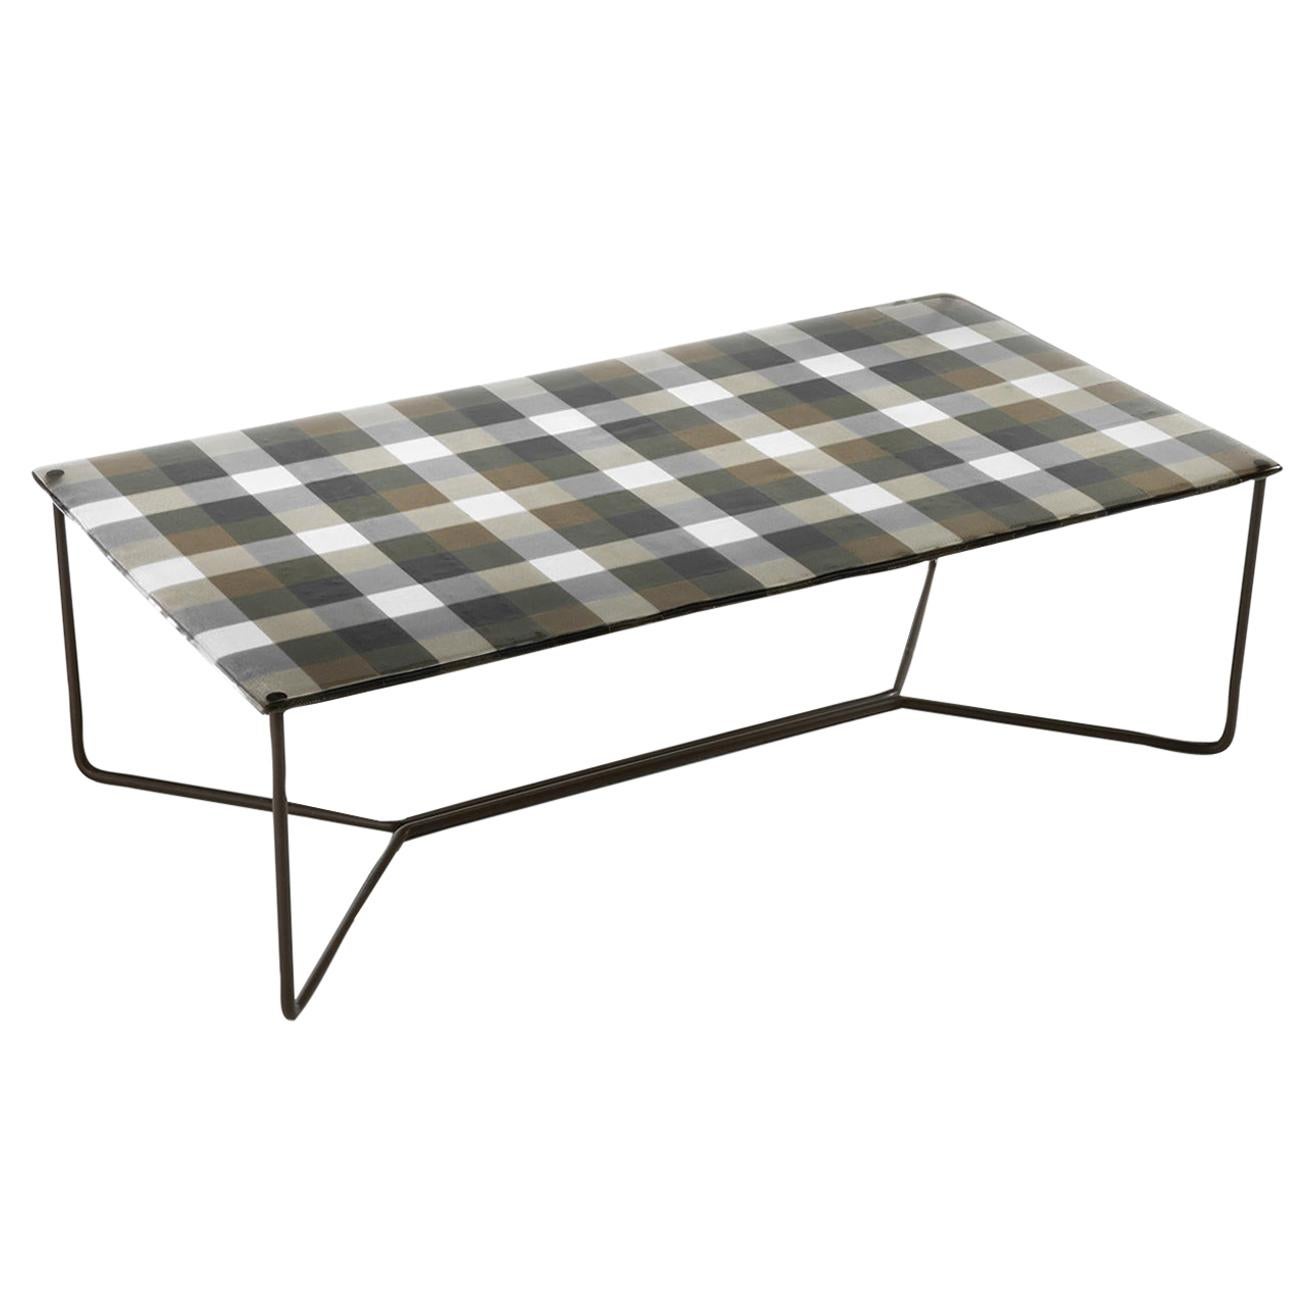 Scottish Coffee Table For Sale